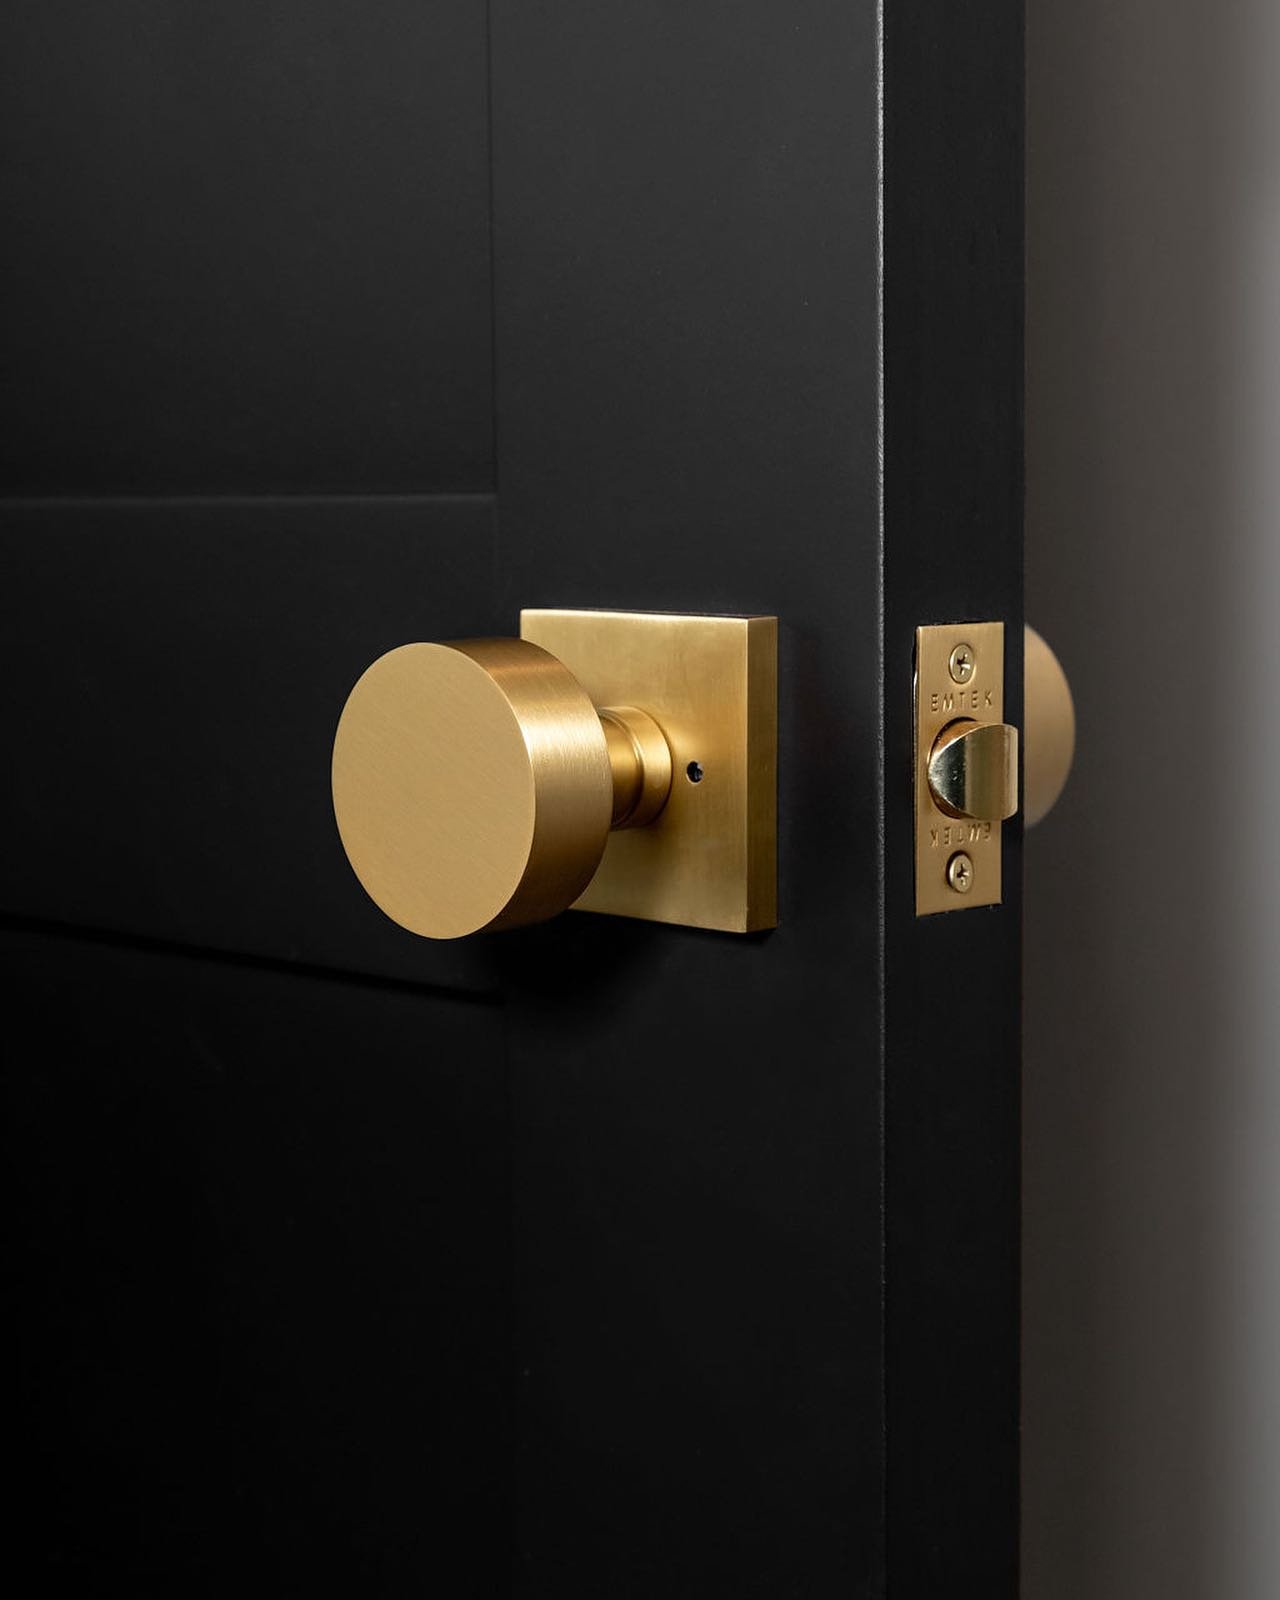 The best designs happen when clients trust the process. My clients were a bit nervous about moving forward with black doors but they are so happy we did. The way the brass hardware pops against that black 👌✨